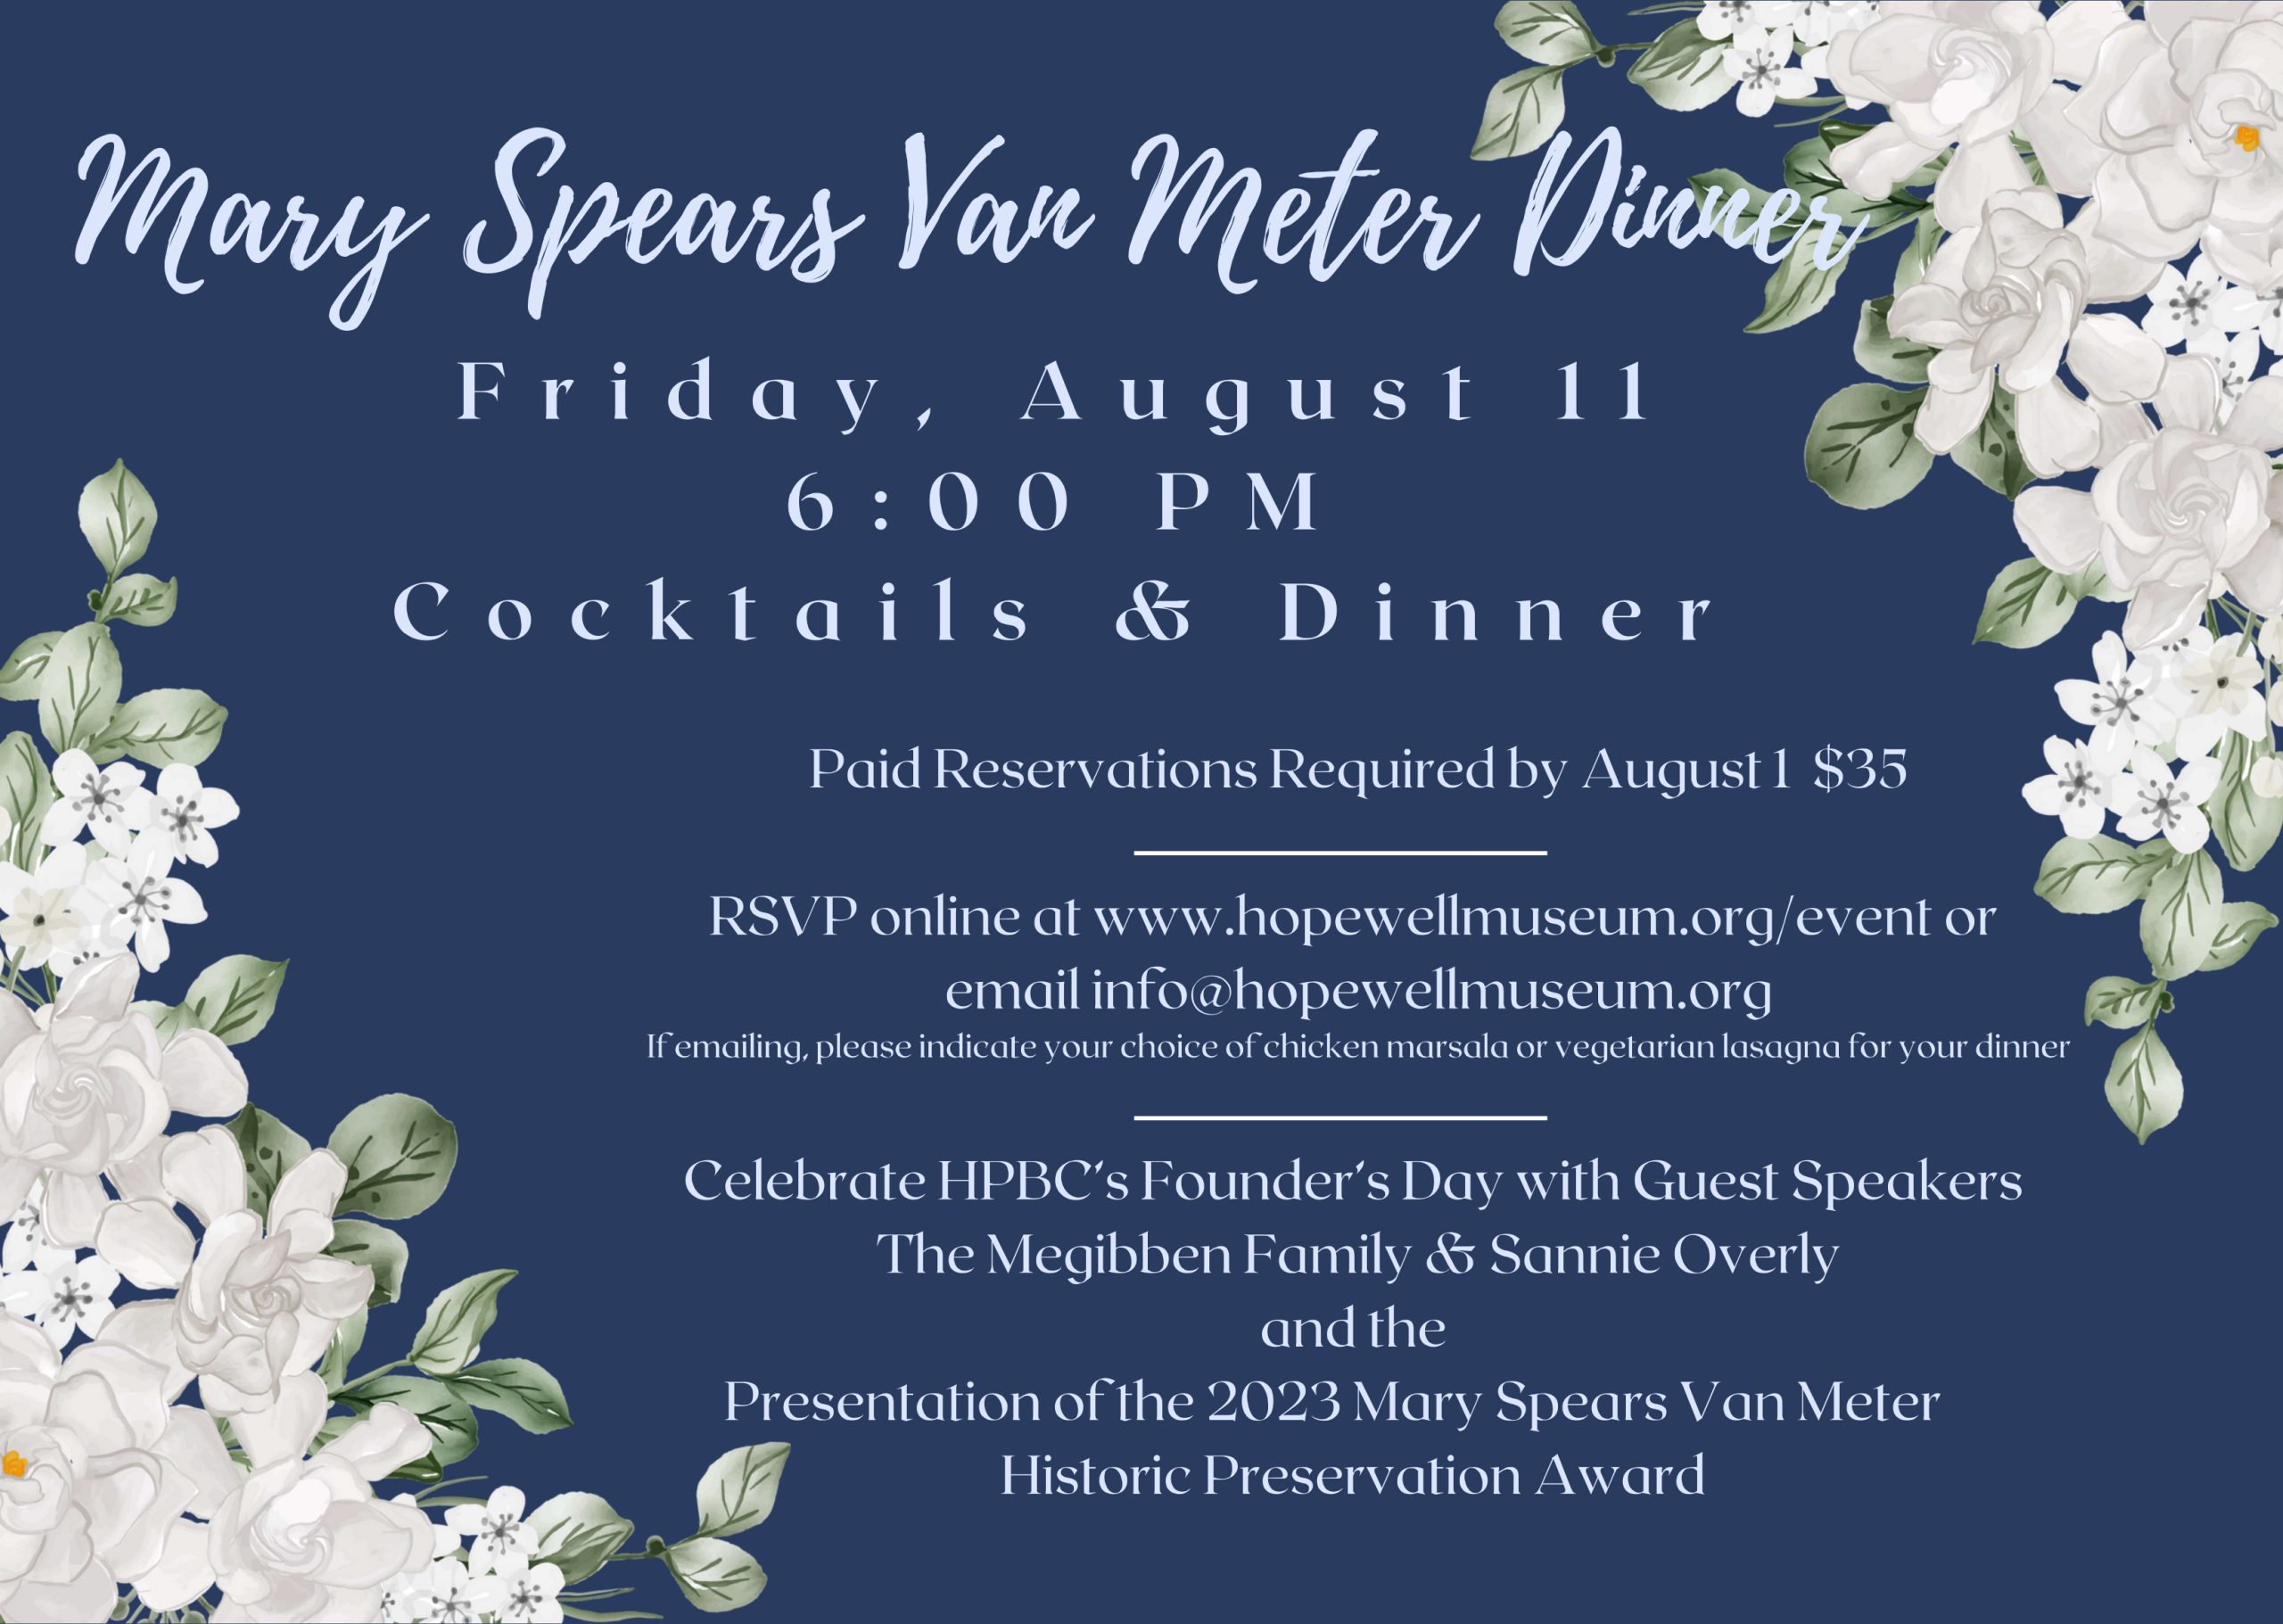 Mary Spears Van Meter Dinner postcard - details are in event text